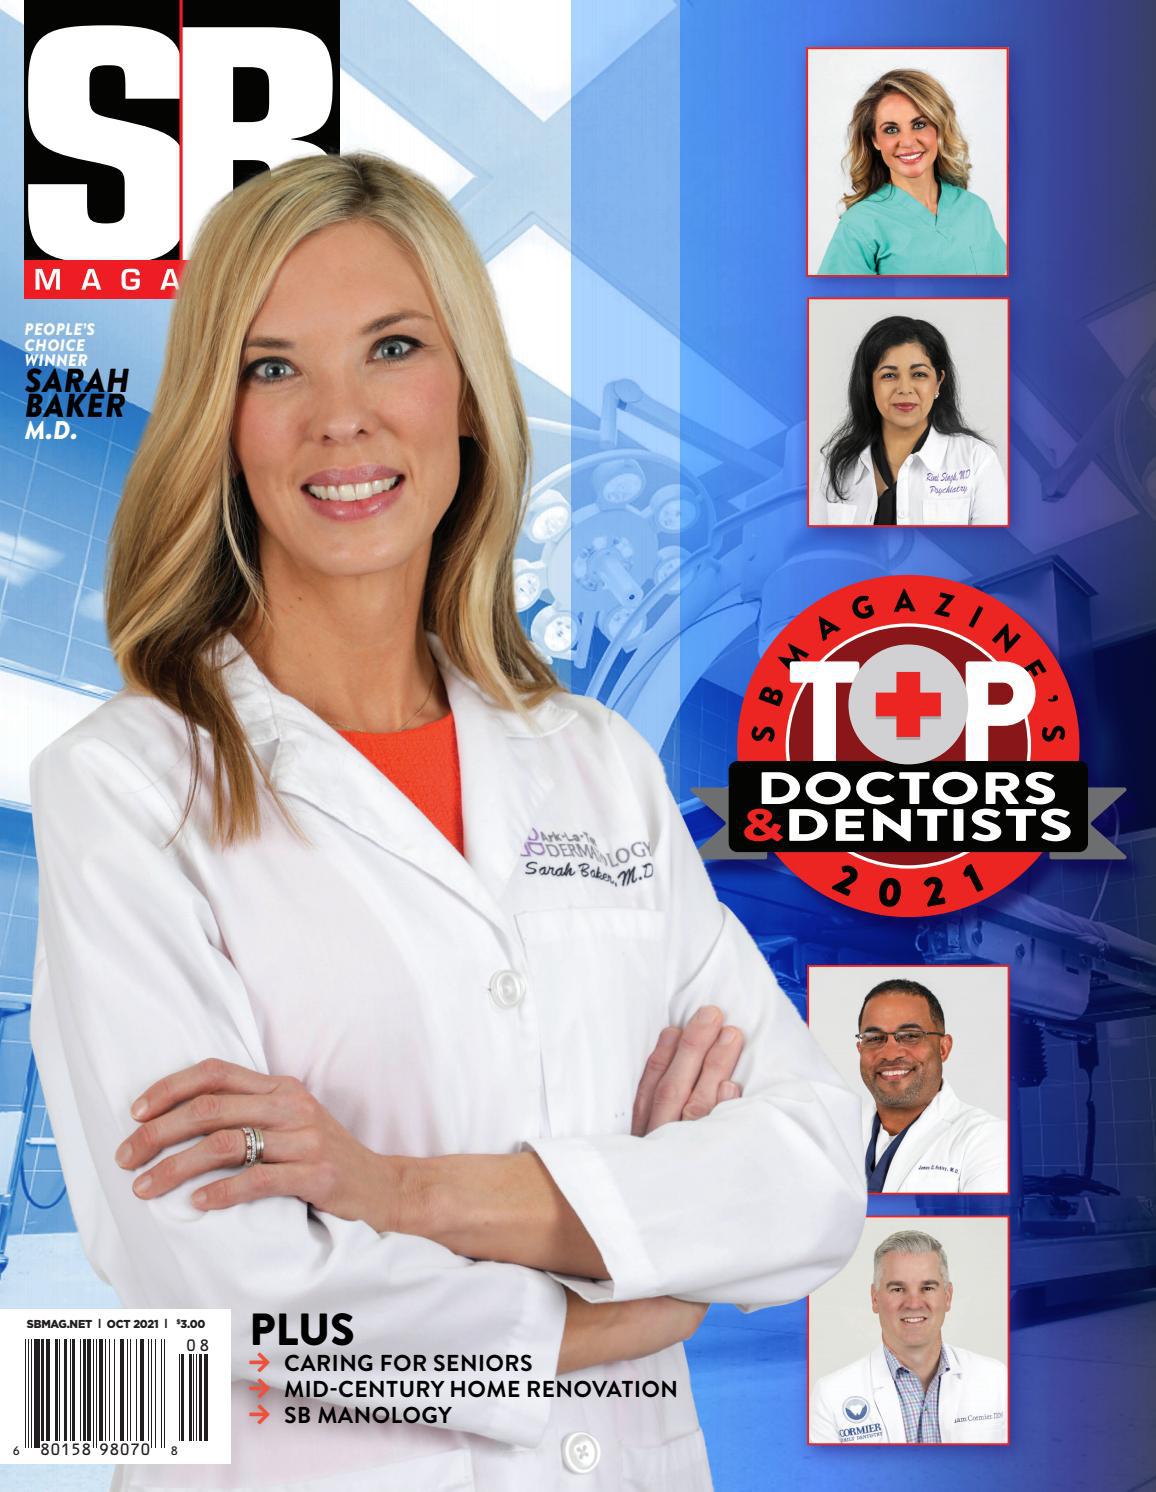 SB Magazine , Top Doctors and Dentists